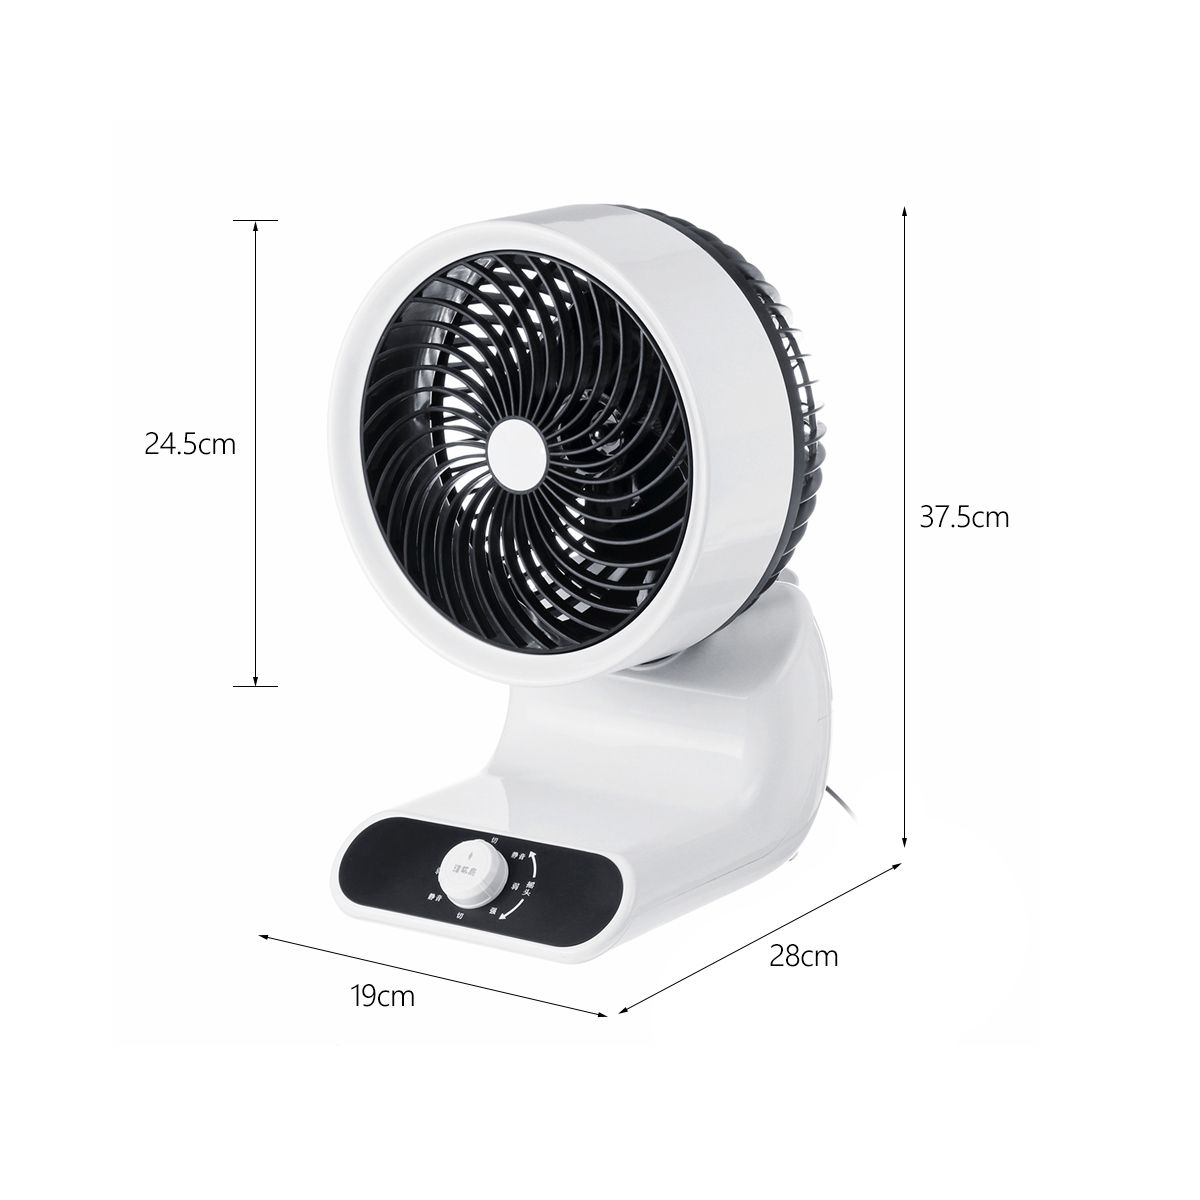 220V-40W-3-Speed-Portable-Air-Circulator-Cooling-Fan-USB-Charging-Cooler-Home-Room-1535628